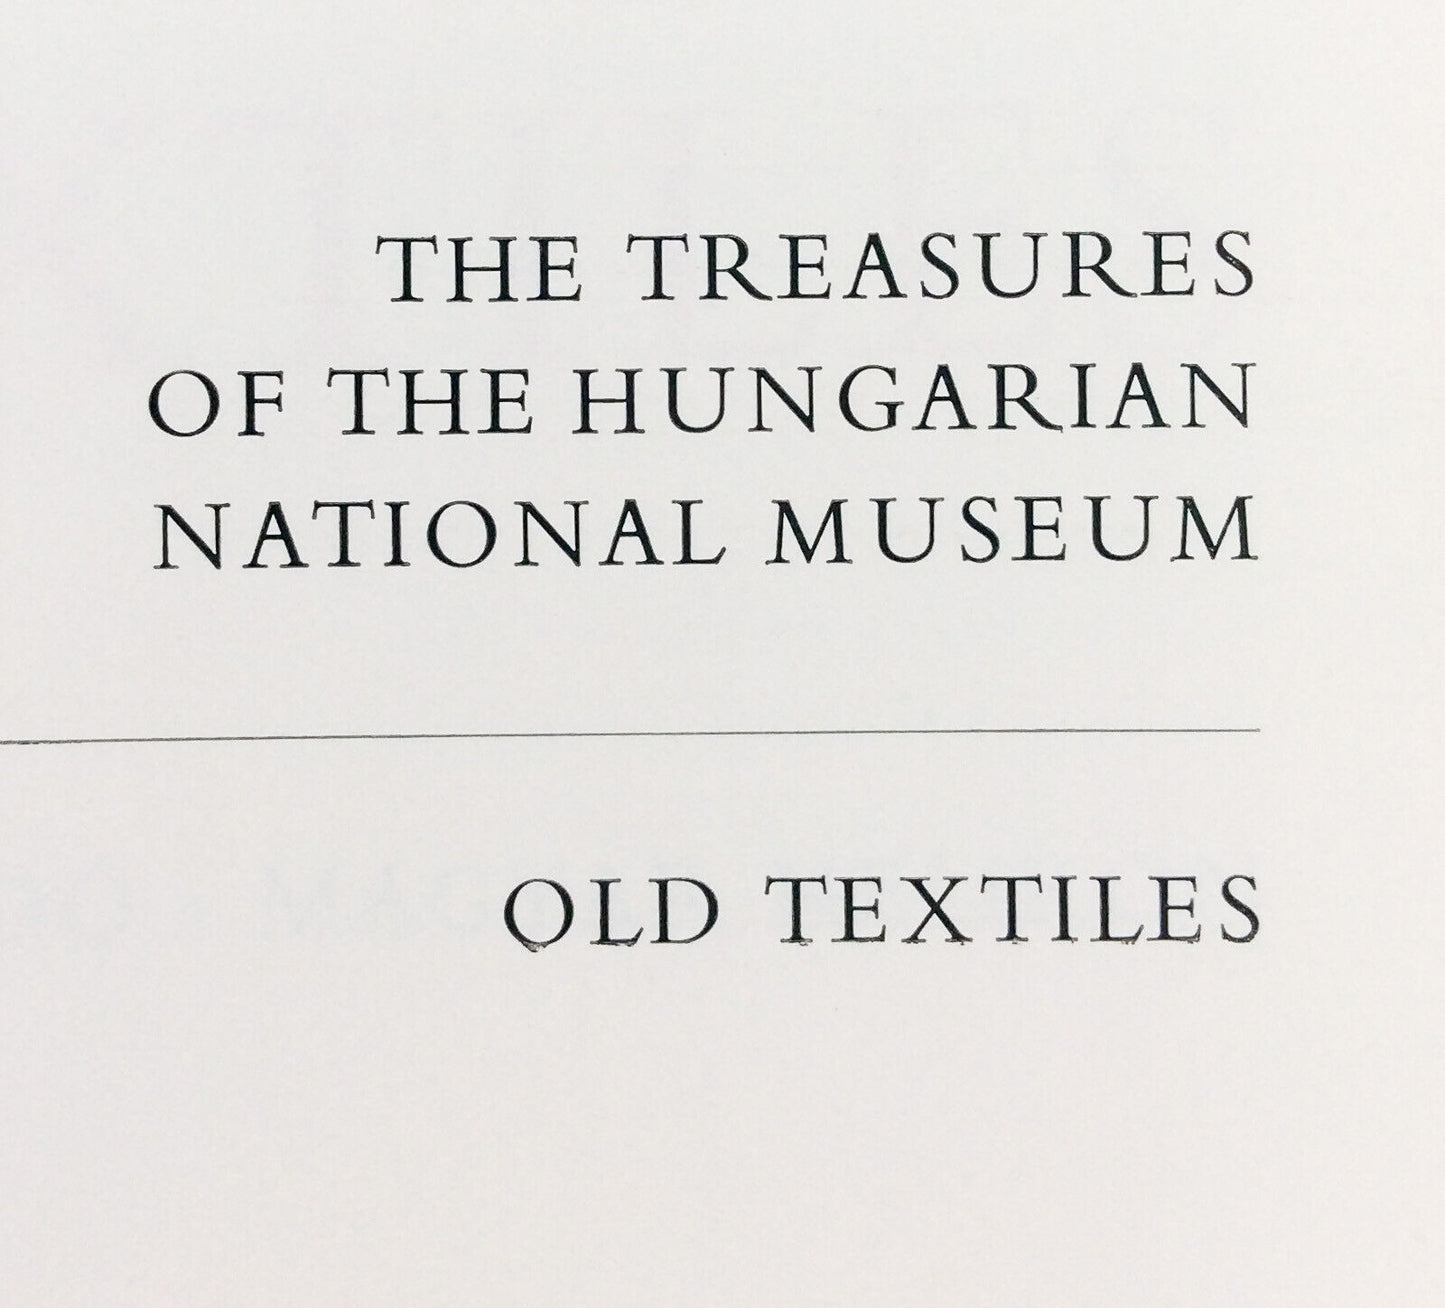 Old Textiles Book by Maria Varju Ember 1981 Hungarian National Museum